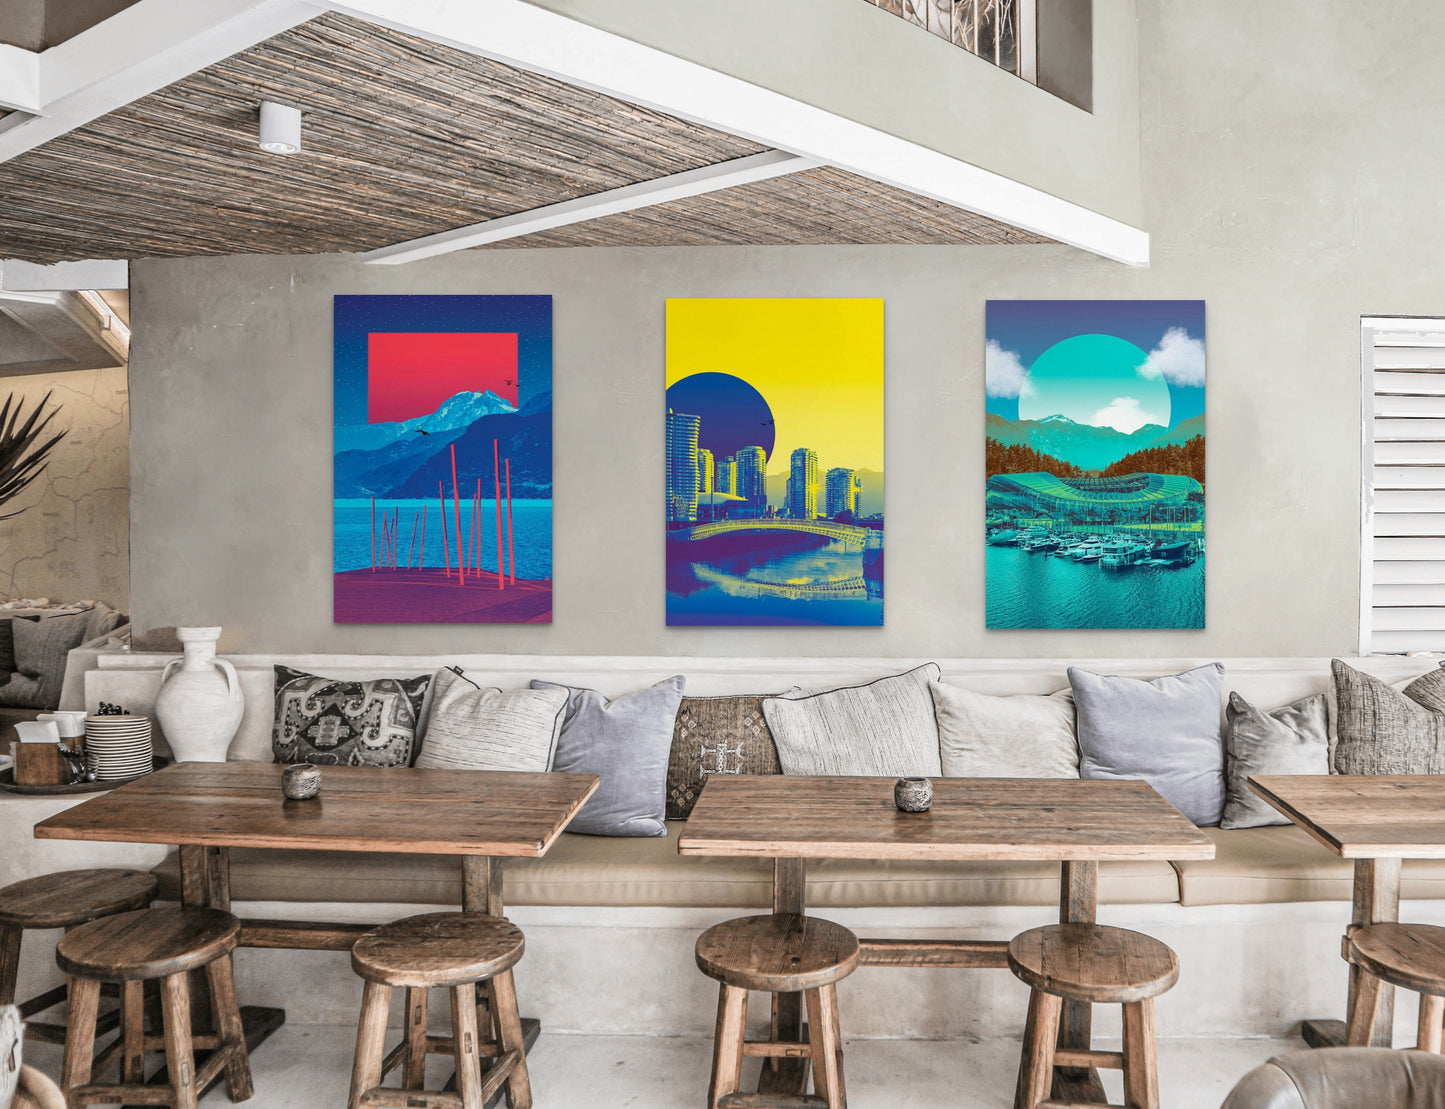 This canvas print wall art merges scenes from Dublin Ireland with Vancouver, B.C.